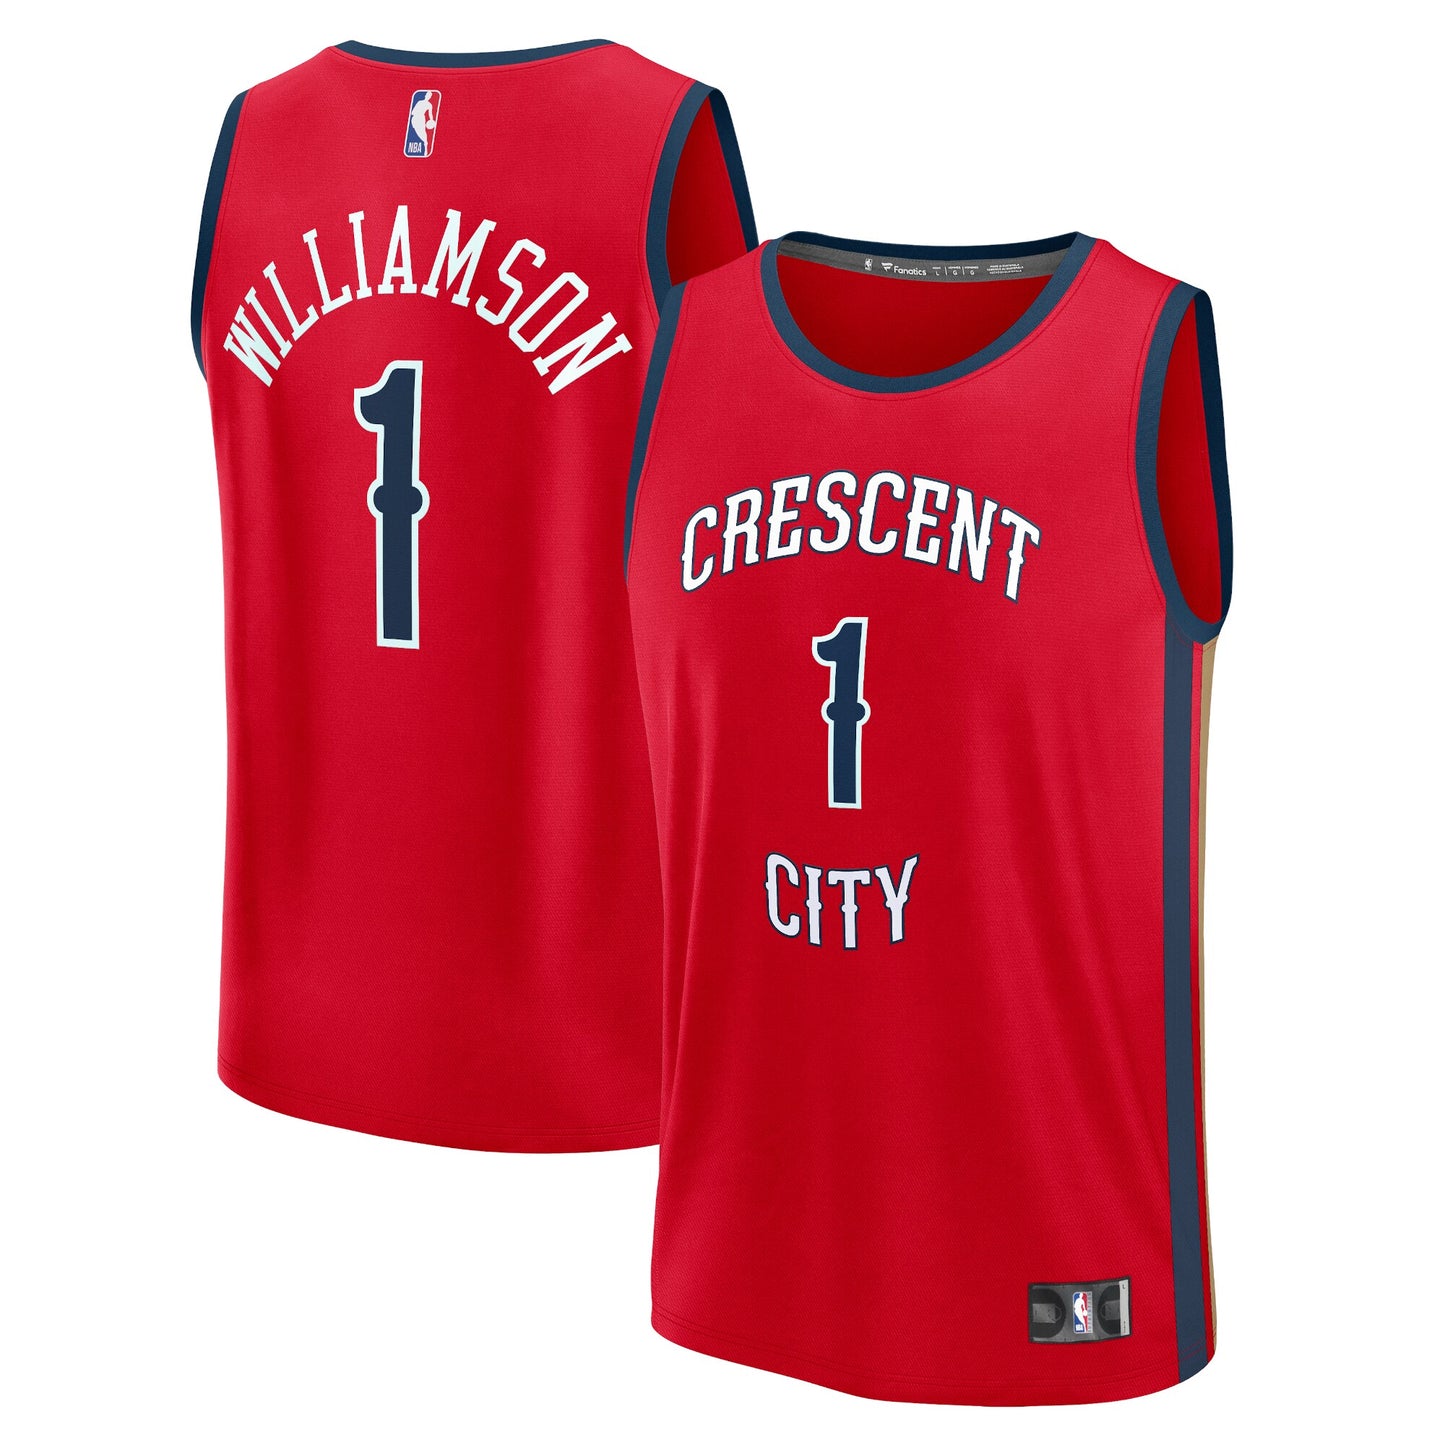 Zion Williamson New Orleans Pelicans Fanatics Branded Youth Fast Break Player Jersey - Statement Edition - Red